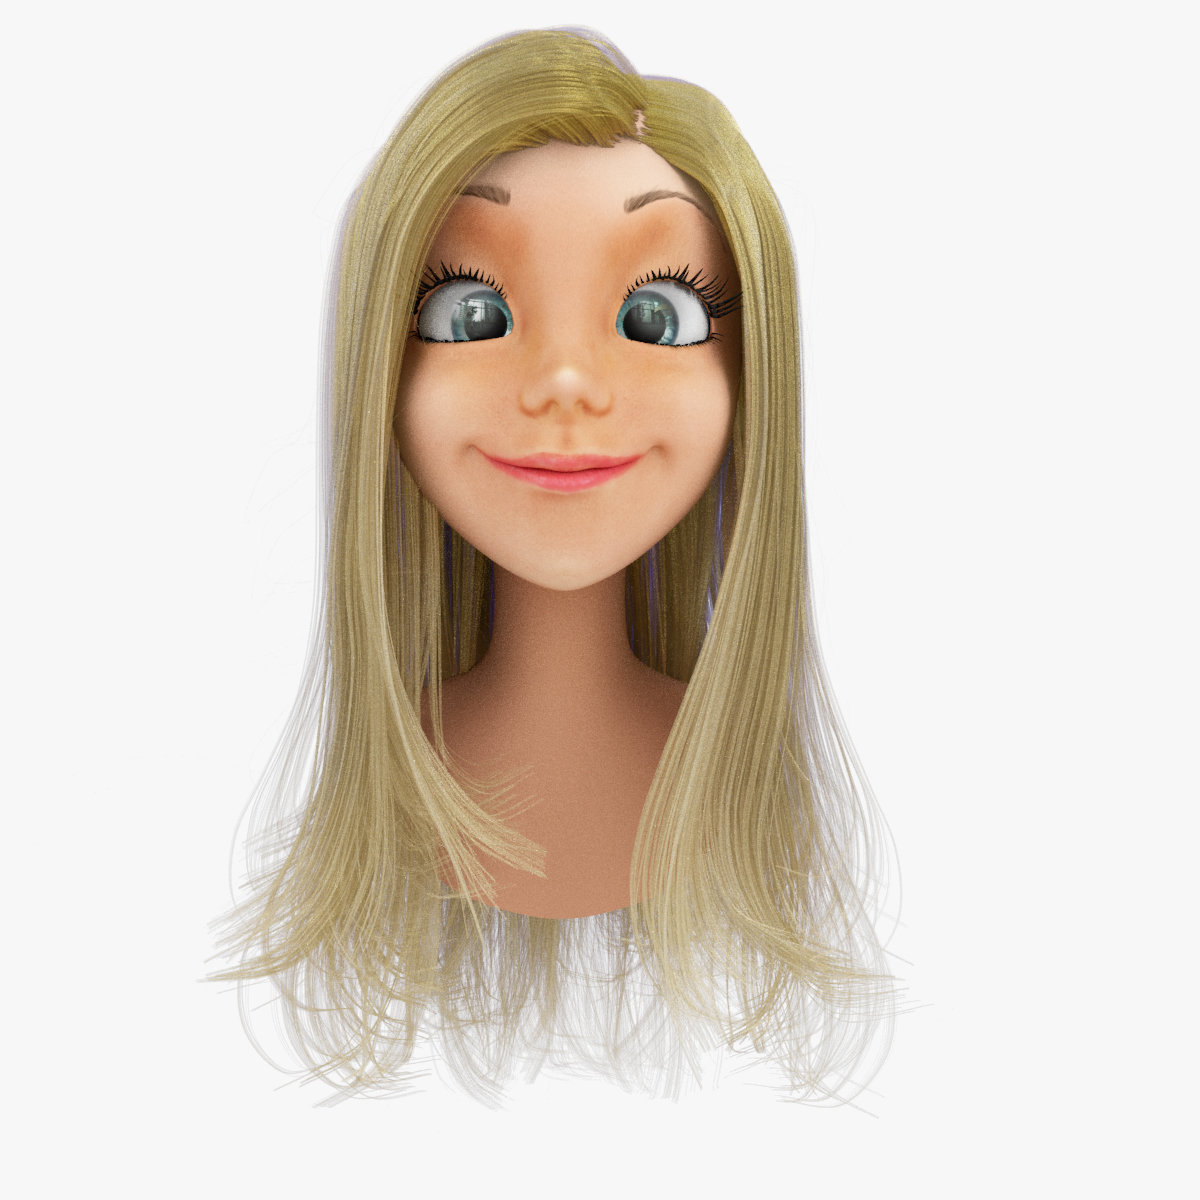 ArtStation - Rigged Cartoon Woman Head A with Hair system and several  skin,eyes and hair color options